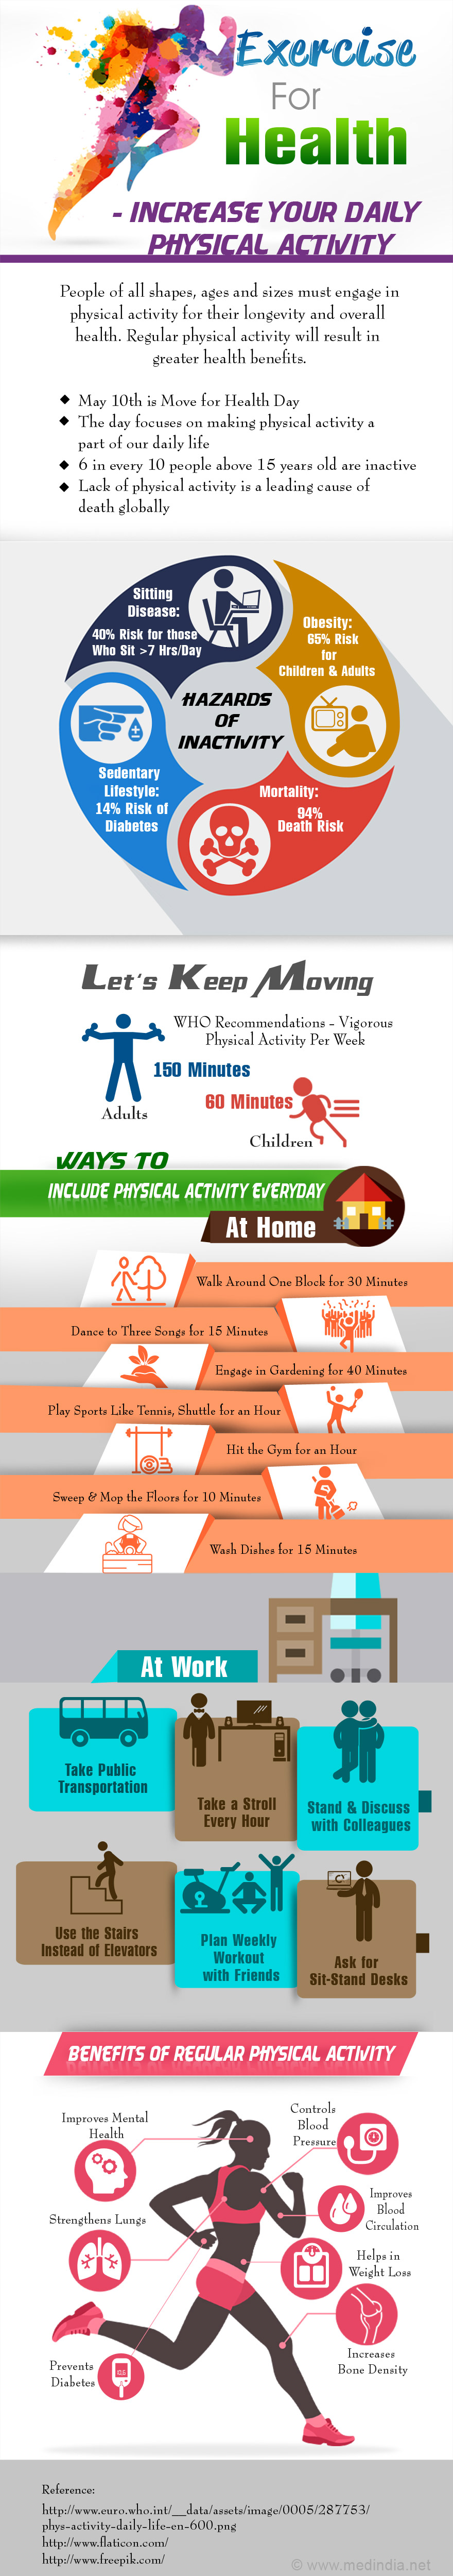 Move For Health - Increase Your Daily Physical Activity - Infographic